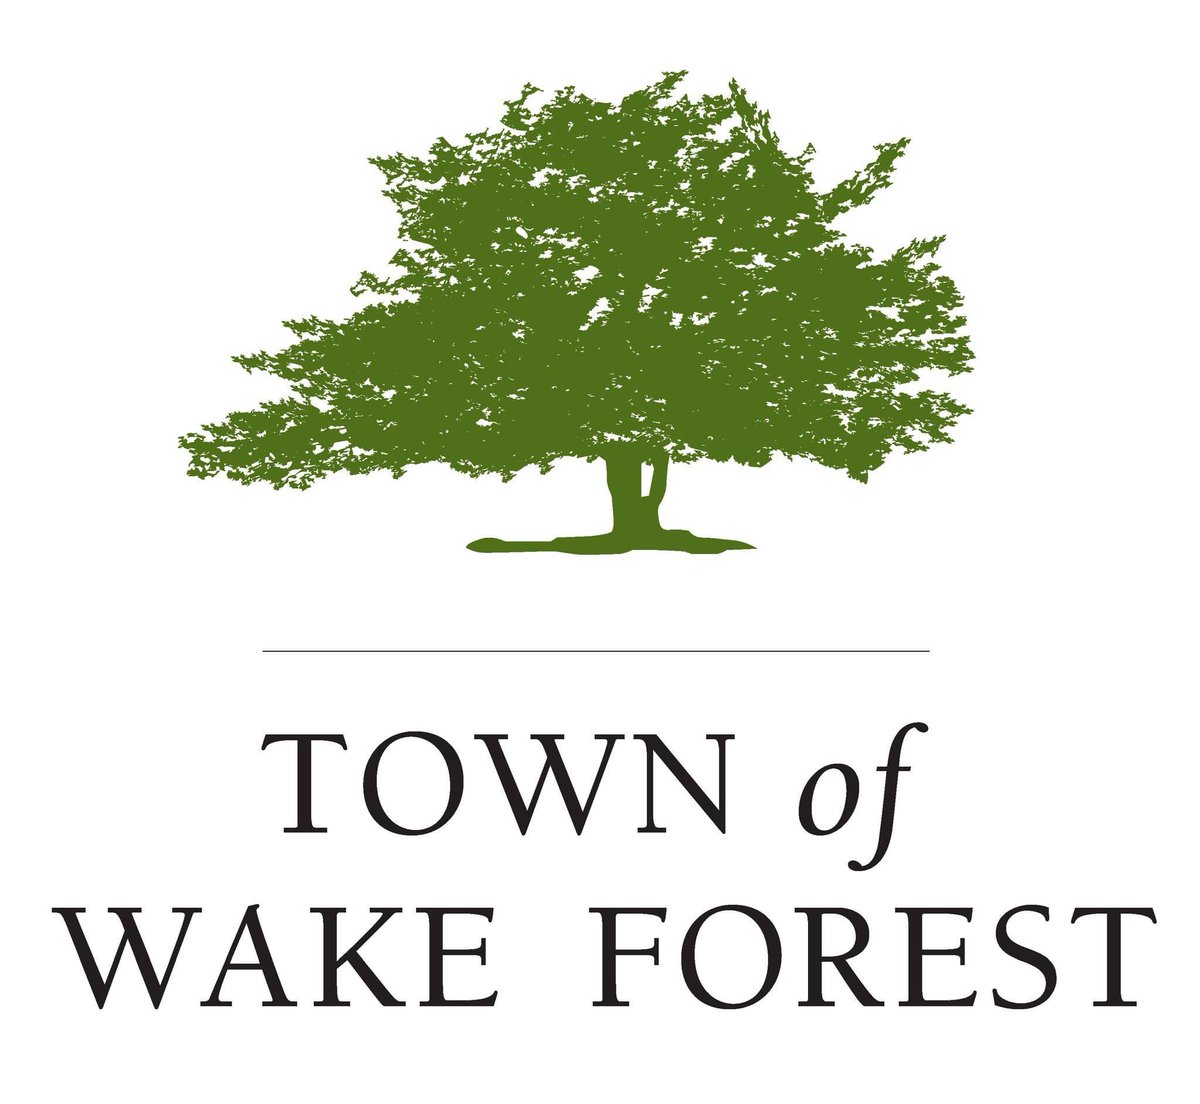 Historic Preservation Commission & Public Art Commission seek to fill vacancies

For more information about these vacancies, email Ella Dowtin at edowtin@wakeforestnc.gov.

#TownofWakeForest #WakeForestNC #AdvisoryBoards #HistoricPreservationCommission #PublicArtCommission